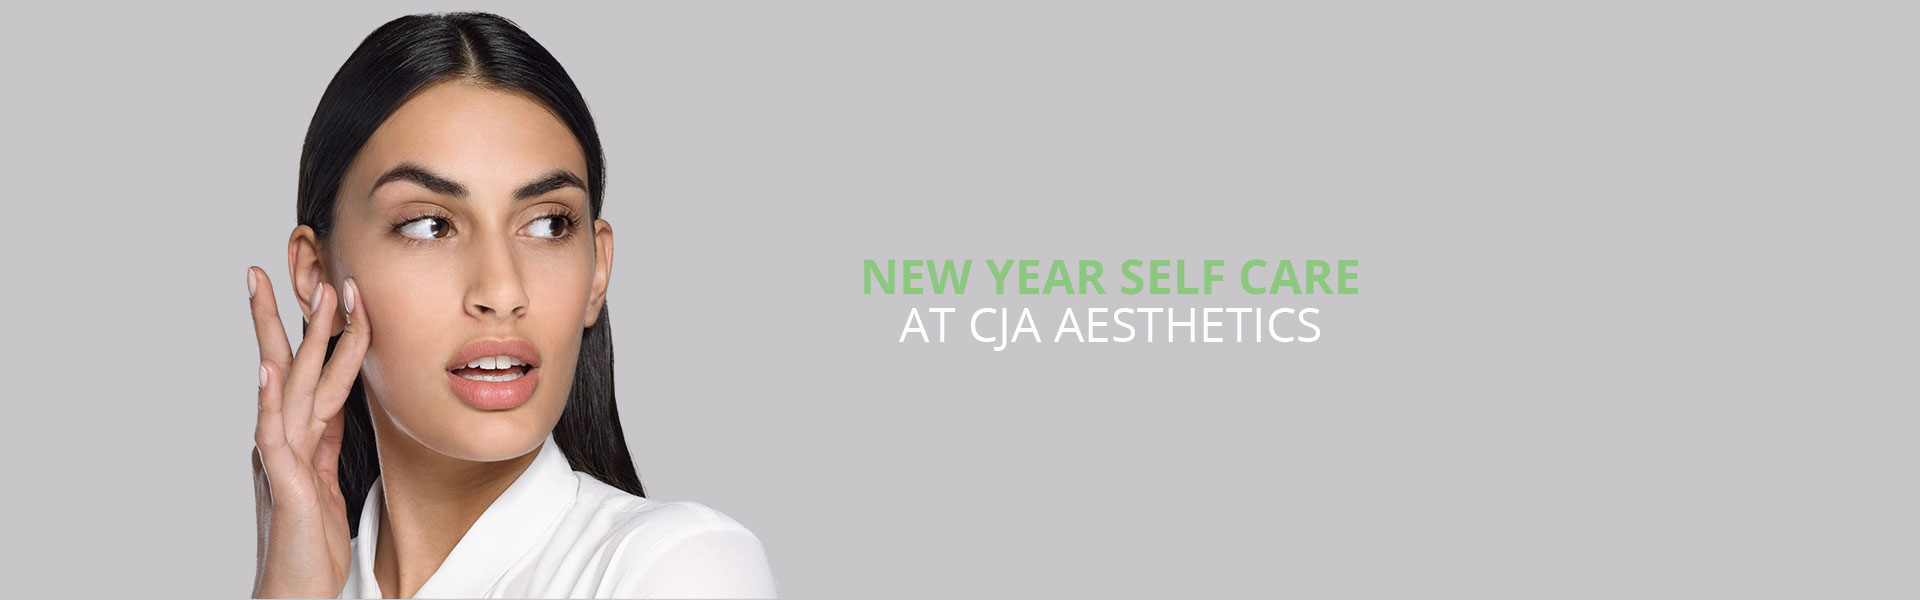 New Year Self Care Skin Clinic Southampton CJA Aesthetics Portsmouth Winchester